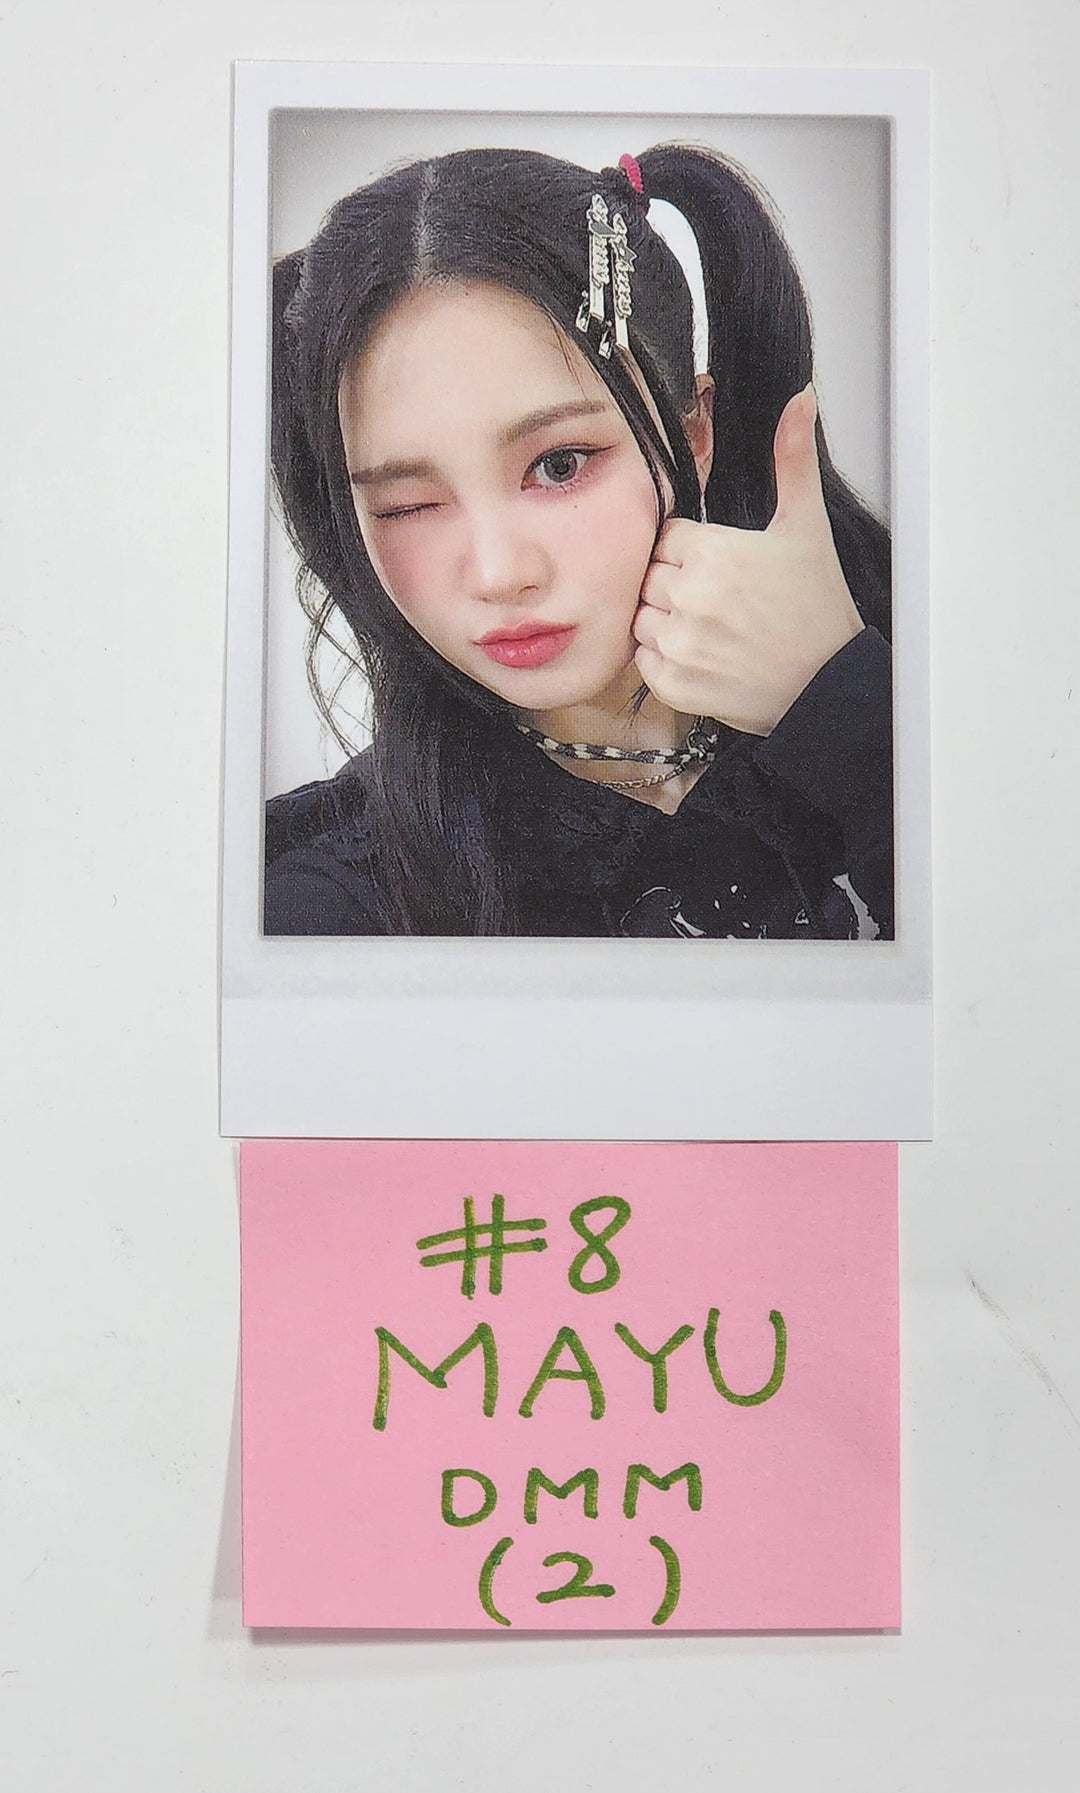 tripleS "ASSEMBLE24" - Dear My Muse Fansign Event Photocard [24.5.20]